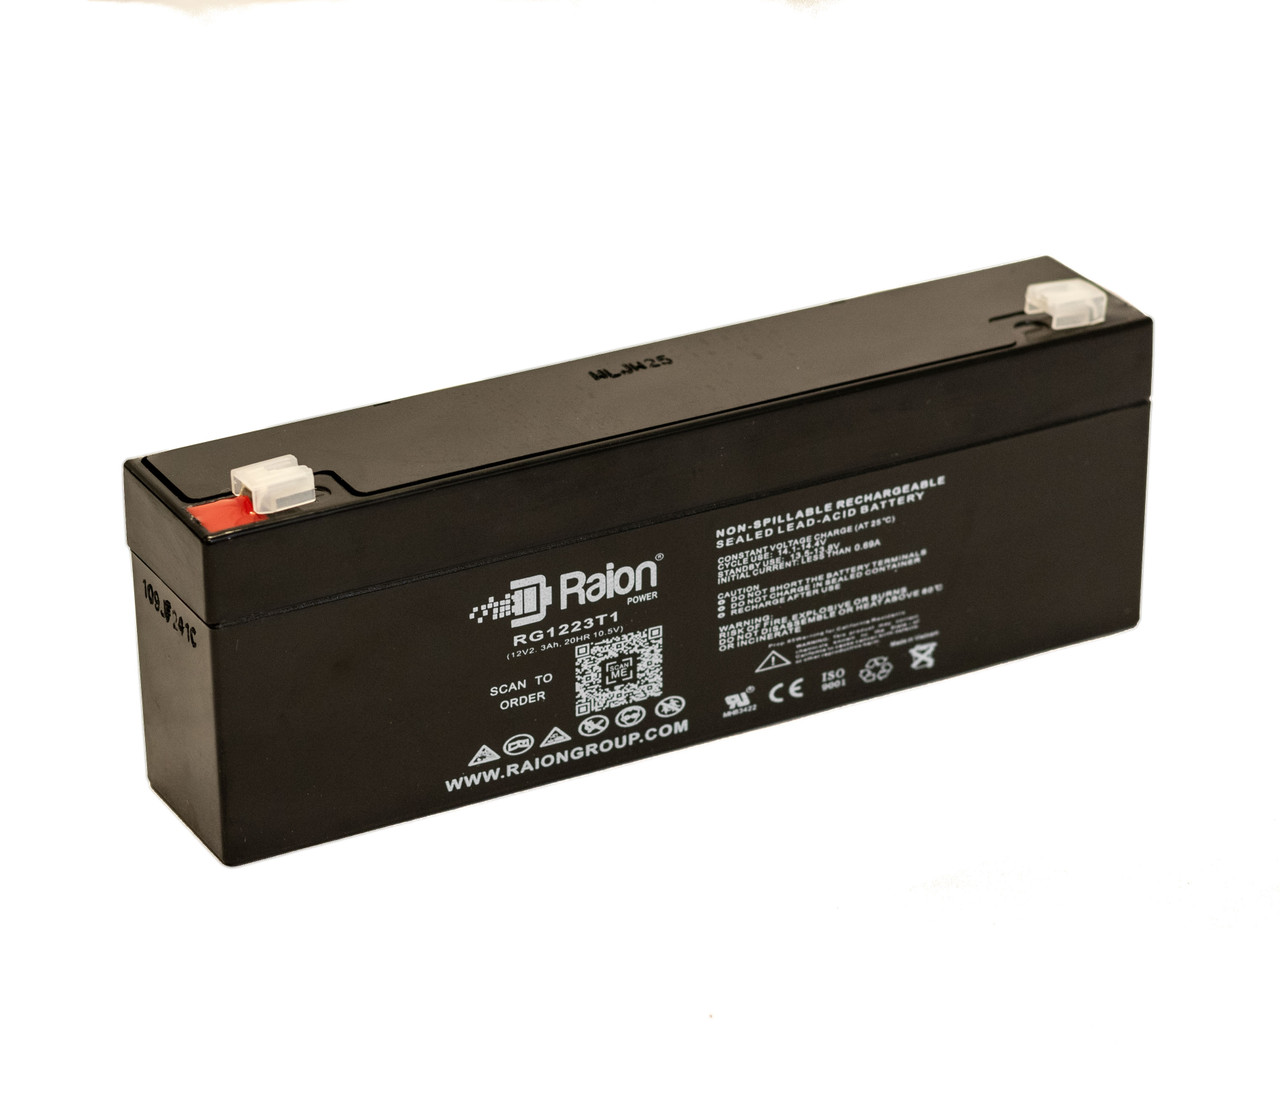 Raion Power RG1223T1 Replacement Battery for Albury Instruments Life Trace Portable Defibrillator